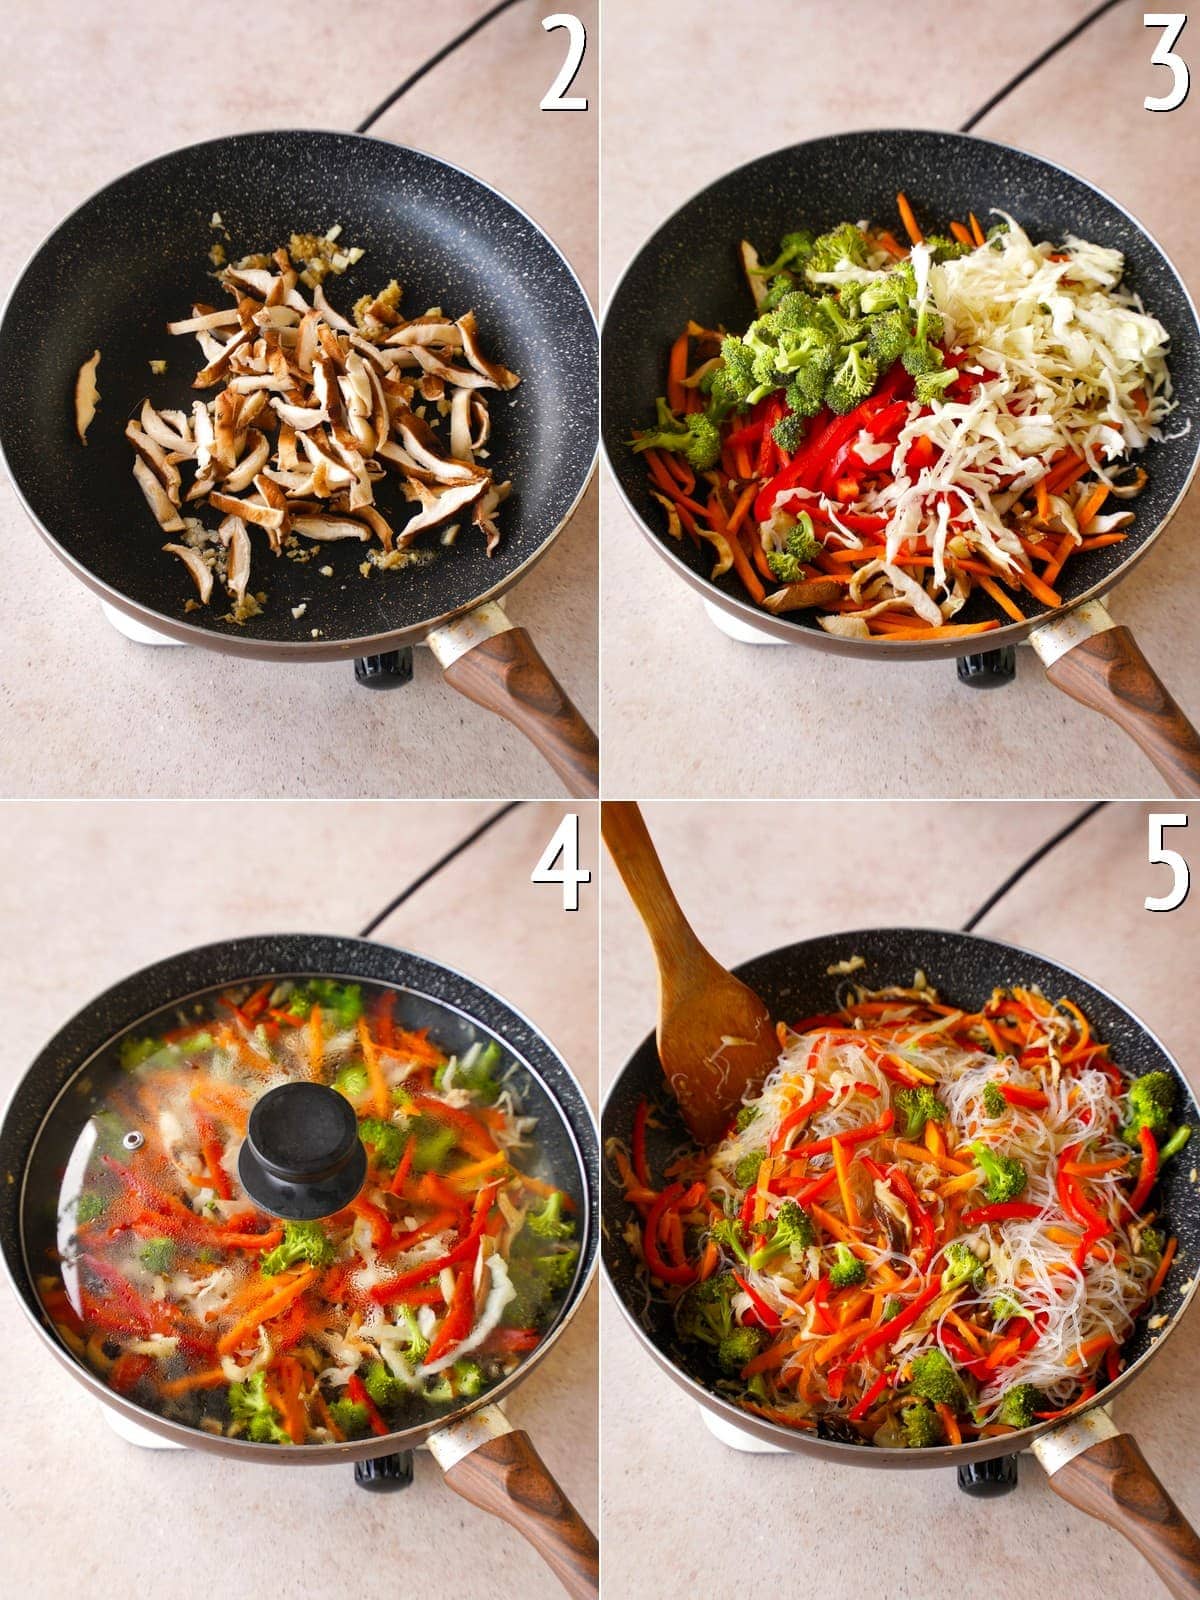 4 step-by-step pictures showing how to cook veggies in black skillet